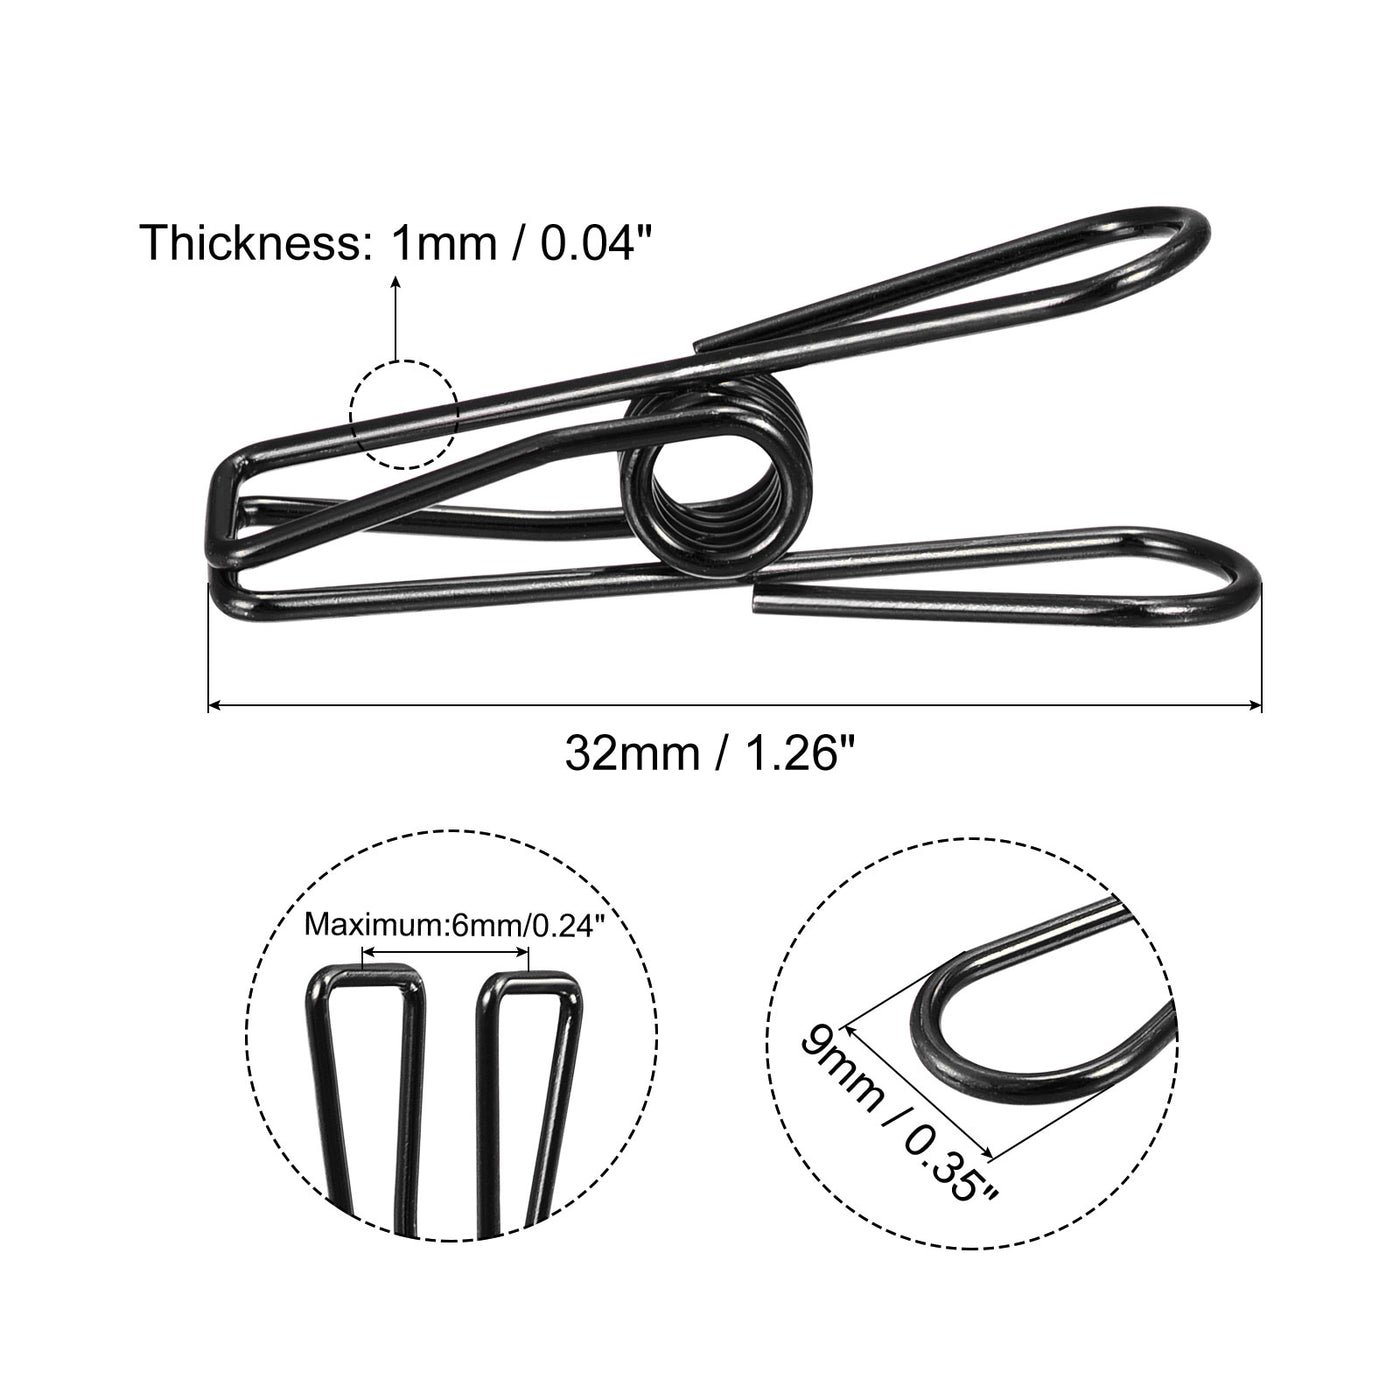 uxcell Uxcell Tablecloth Clips, 32mm Carbon Steel Clamps for Fixing Table Cloth, Black 16 Pcs